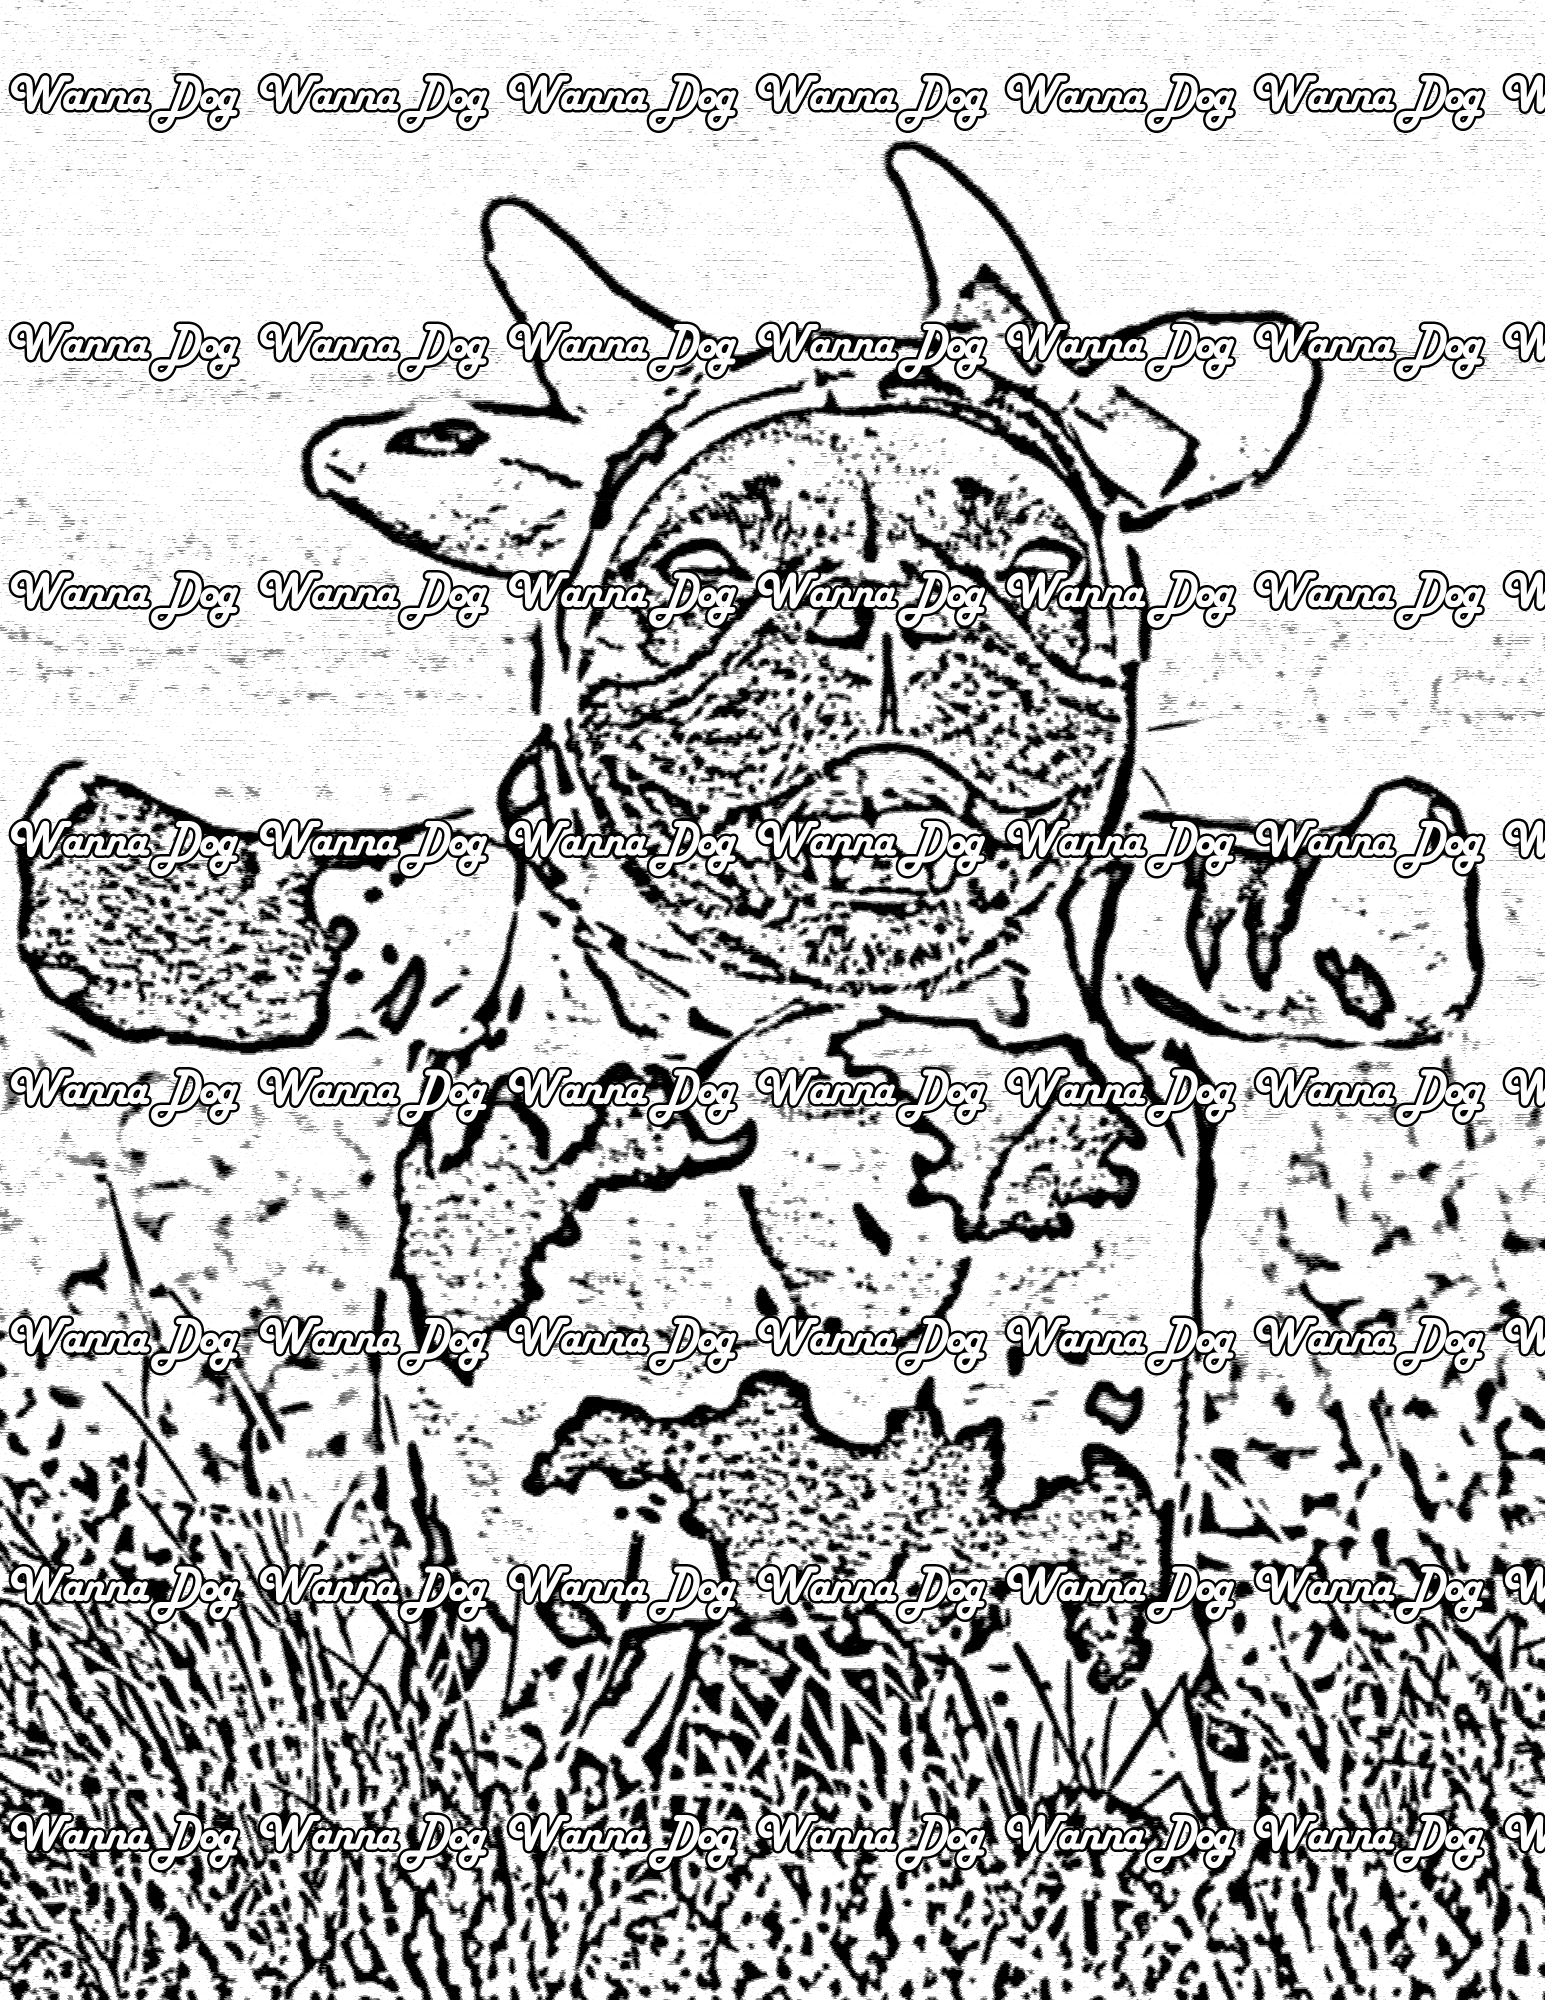 French Bulldog Coloring Page of a French Bulldog in a cow costume